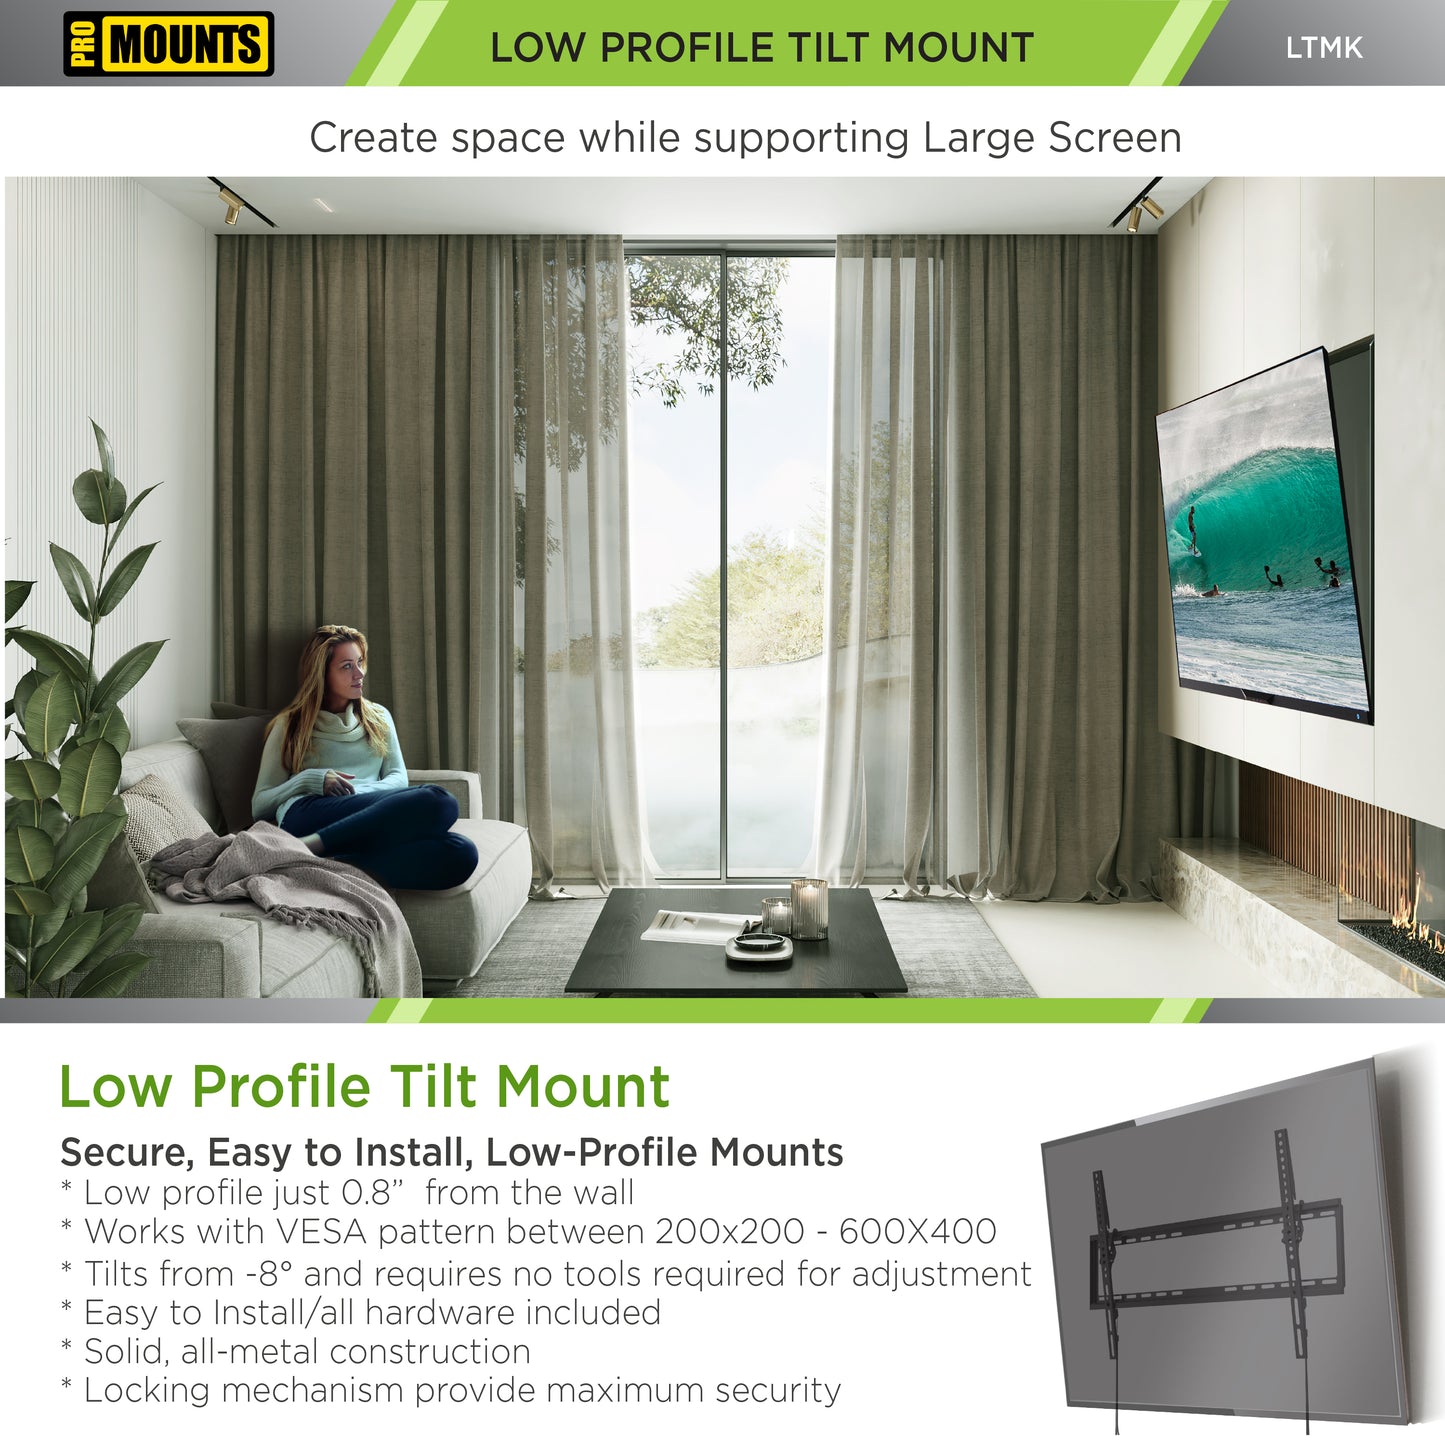 ProMounts Tilting TV Wall Mount for 42"-75" Screens Holds up to 100 lbs with HDMI Cable and Screen Cleaner (LTMK)